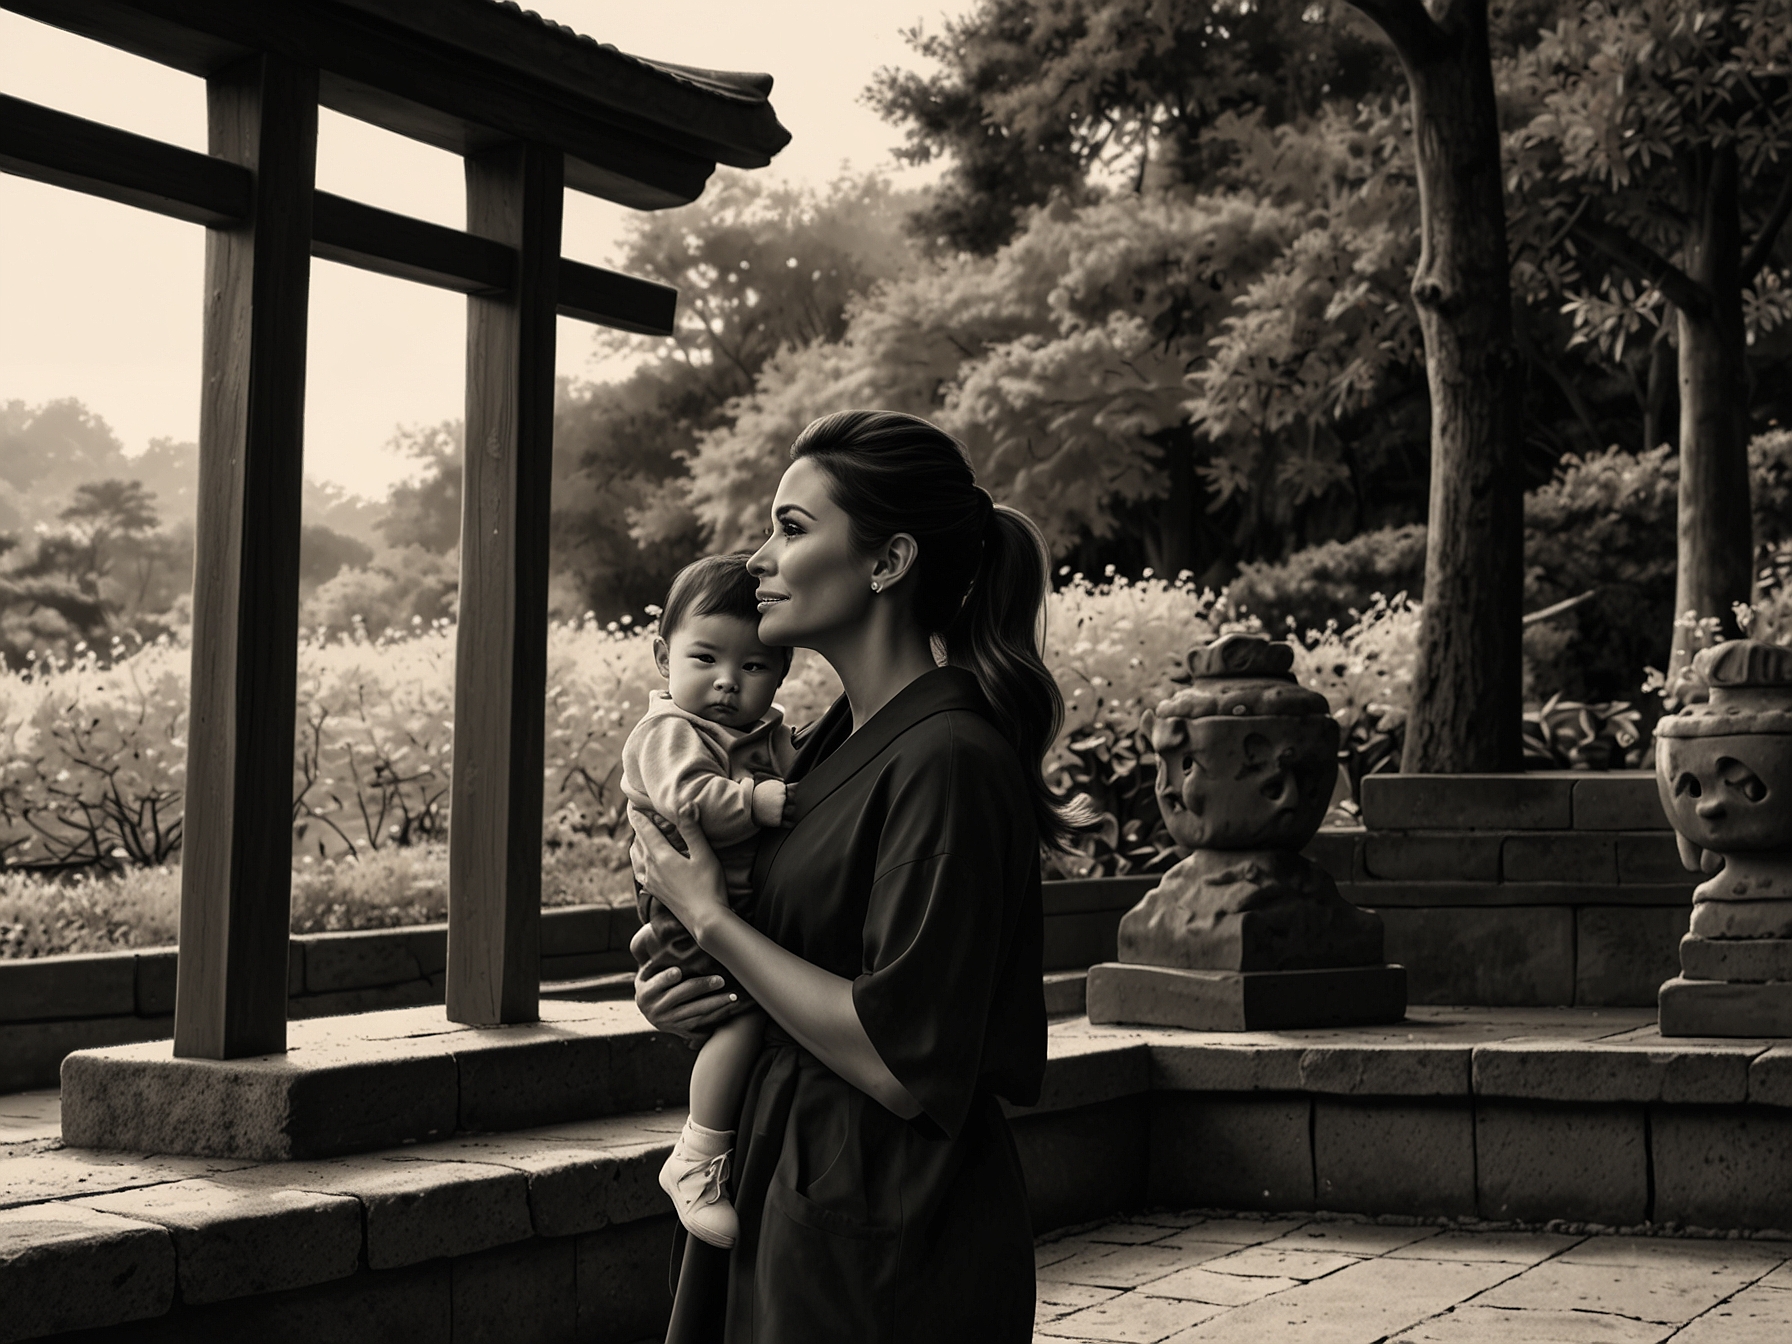 Eva Longoria and her son Santiago exploring a traditional Japanese shrine, capturing Santiago's fascination with Japanese culture during their educational trip to Japan.